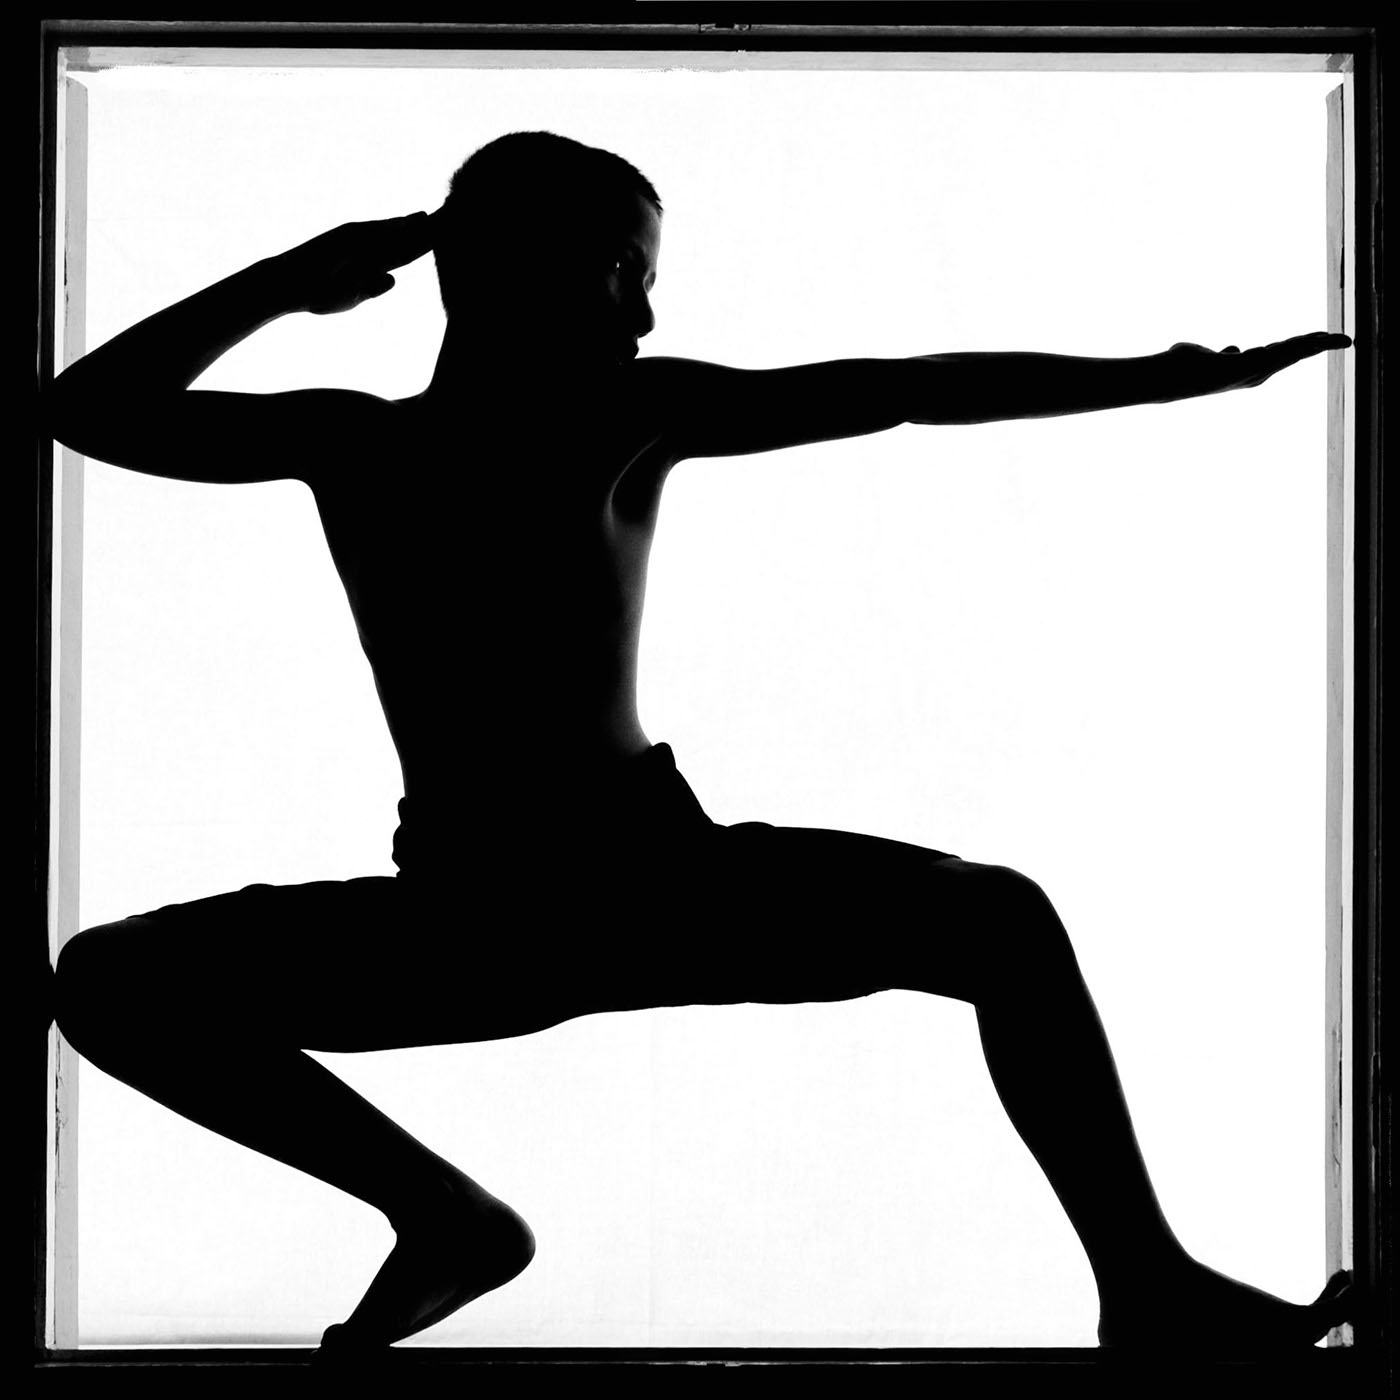 Window Silhouette Black&white shape forum possession fight ideas Collection humanbody